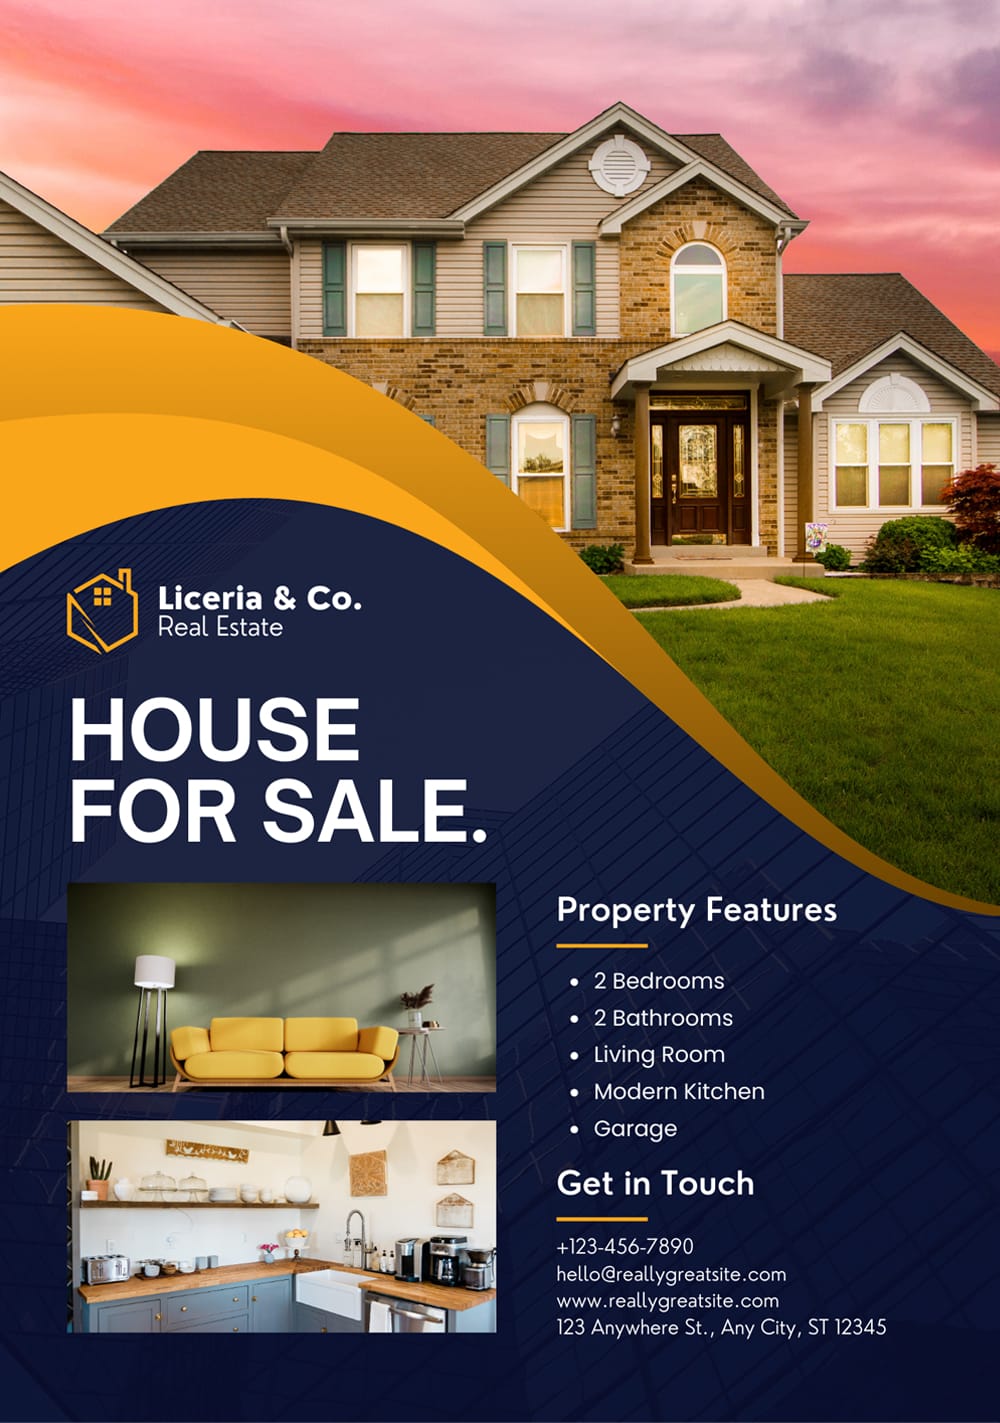 Minimalist Modern House For Sale Flyer Template